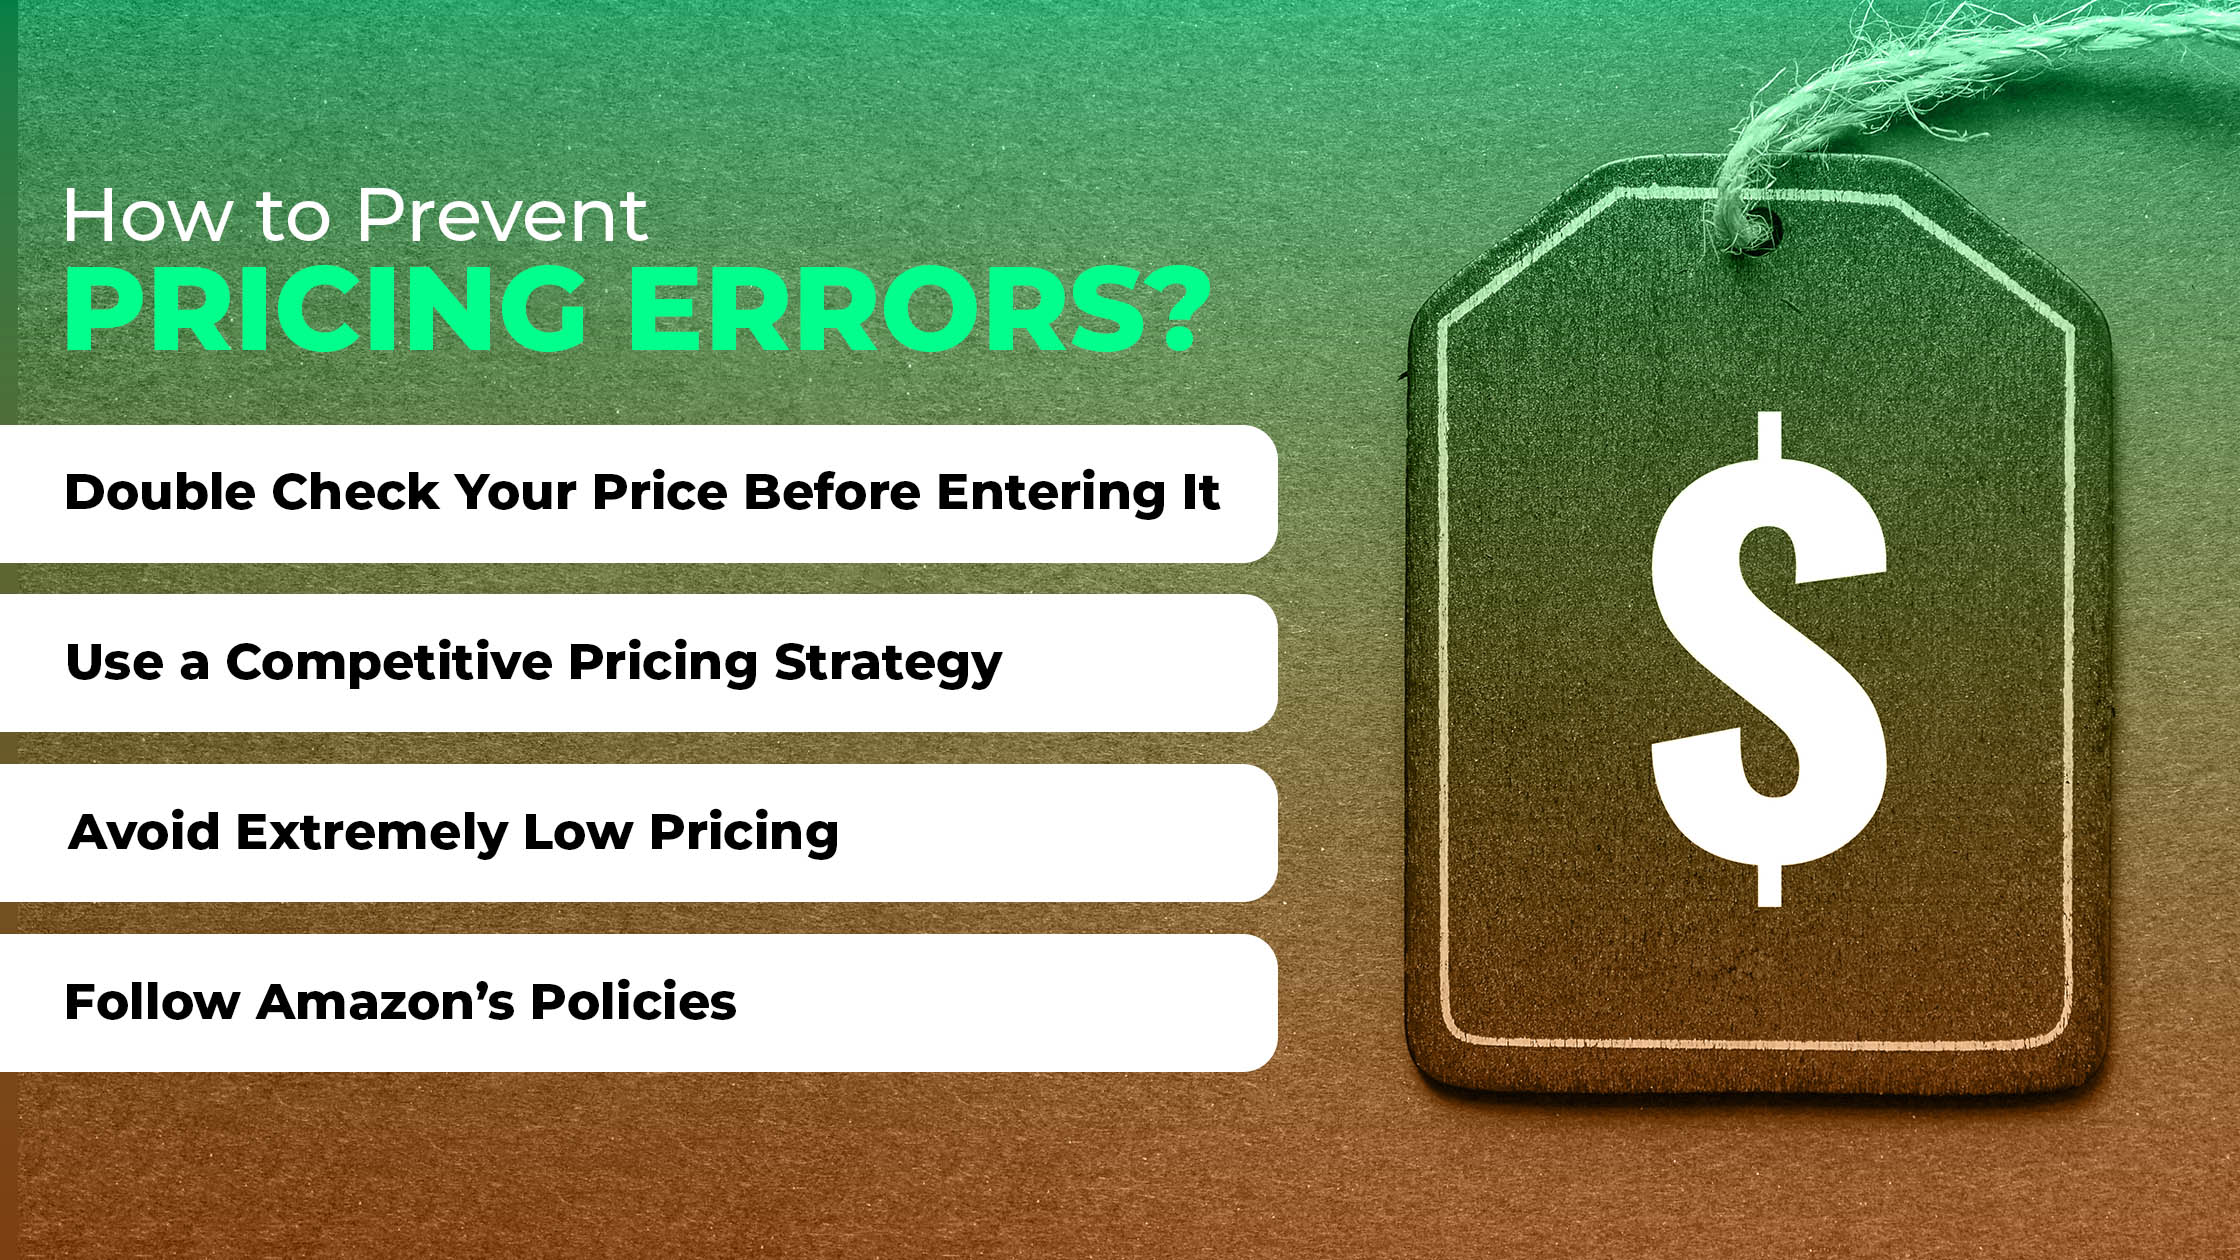 how to prevent pricing errors on Amazon